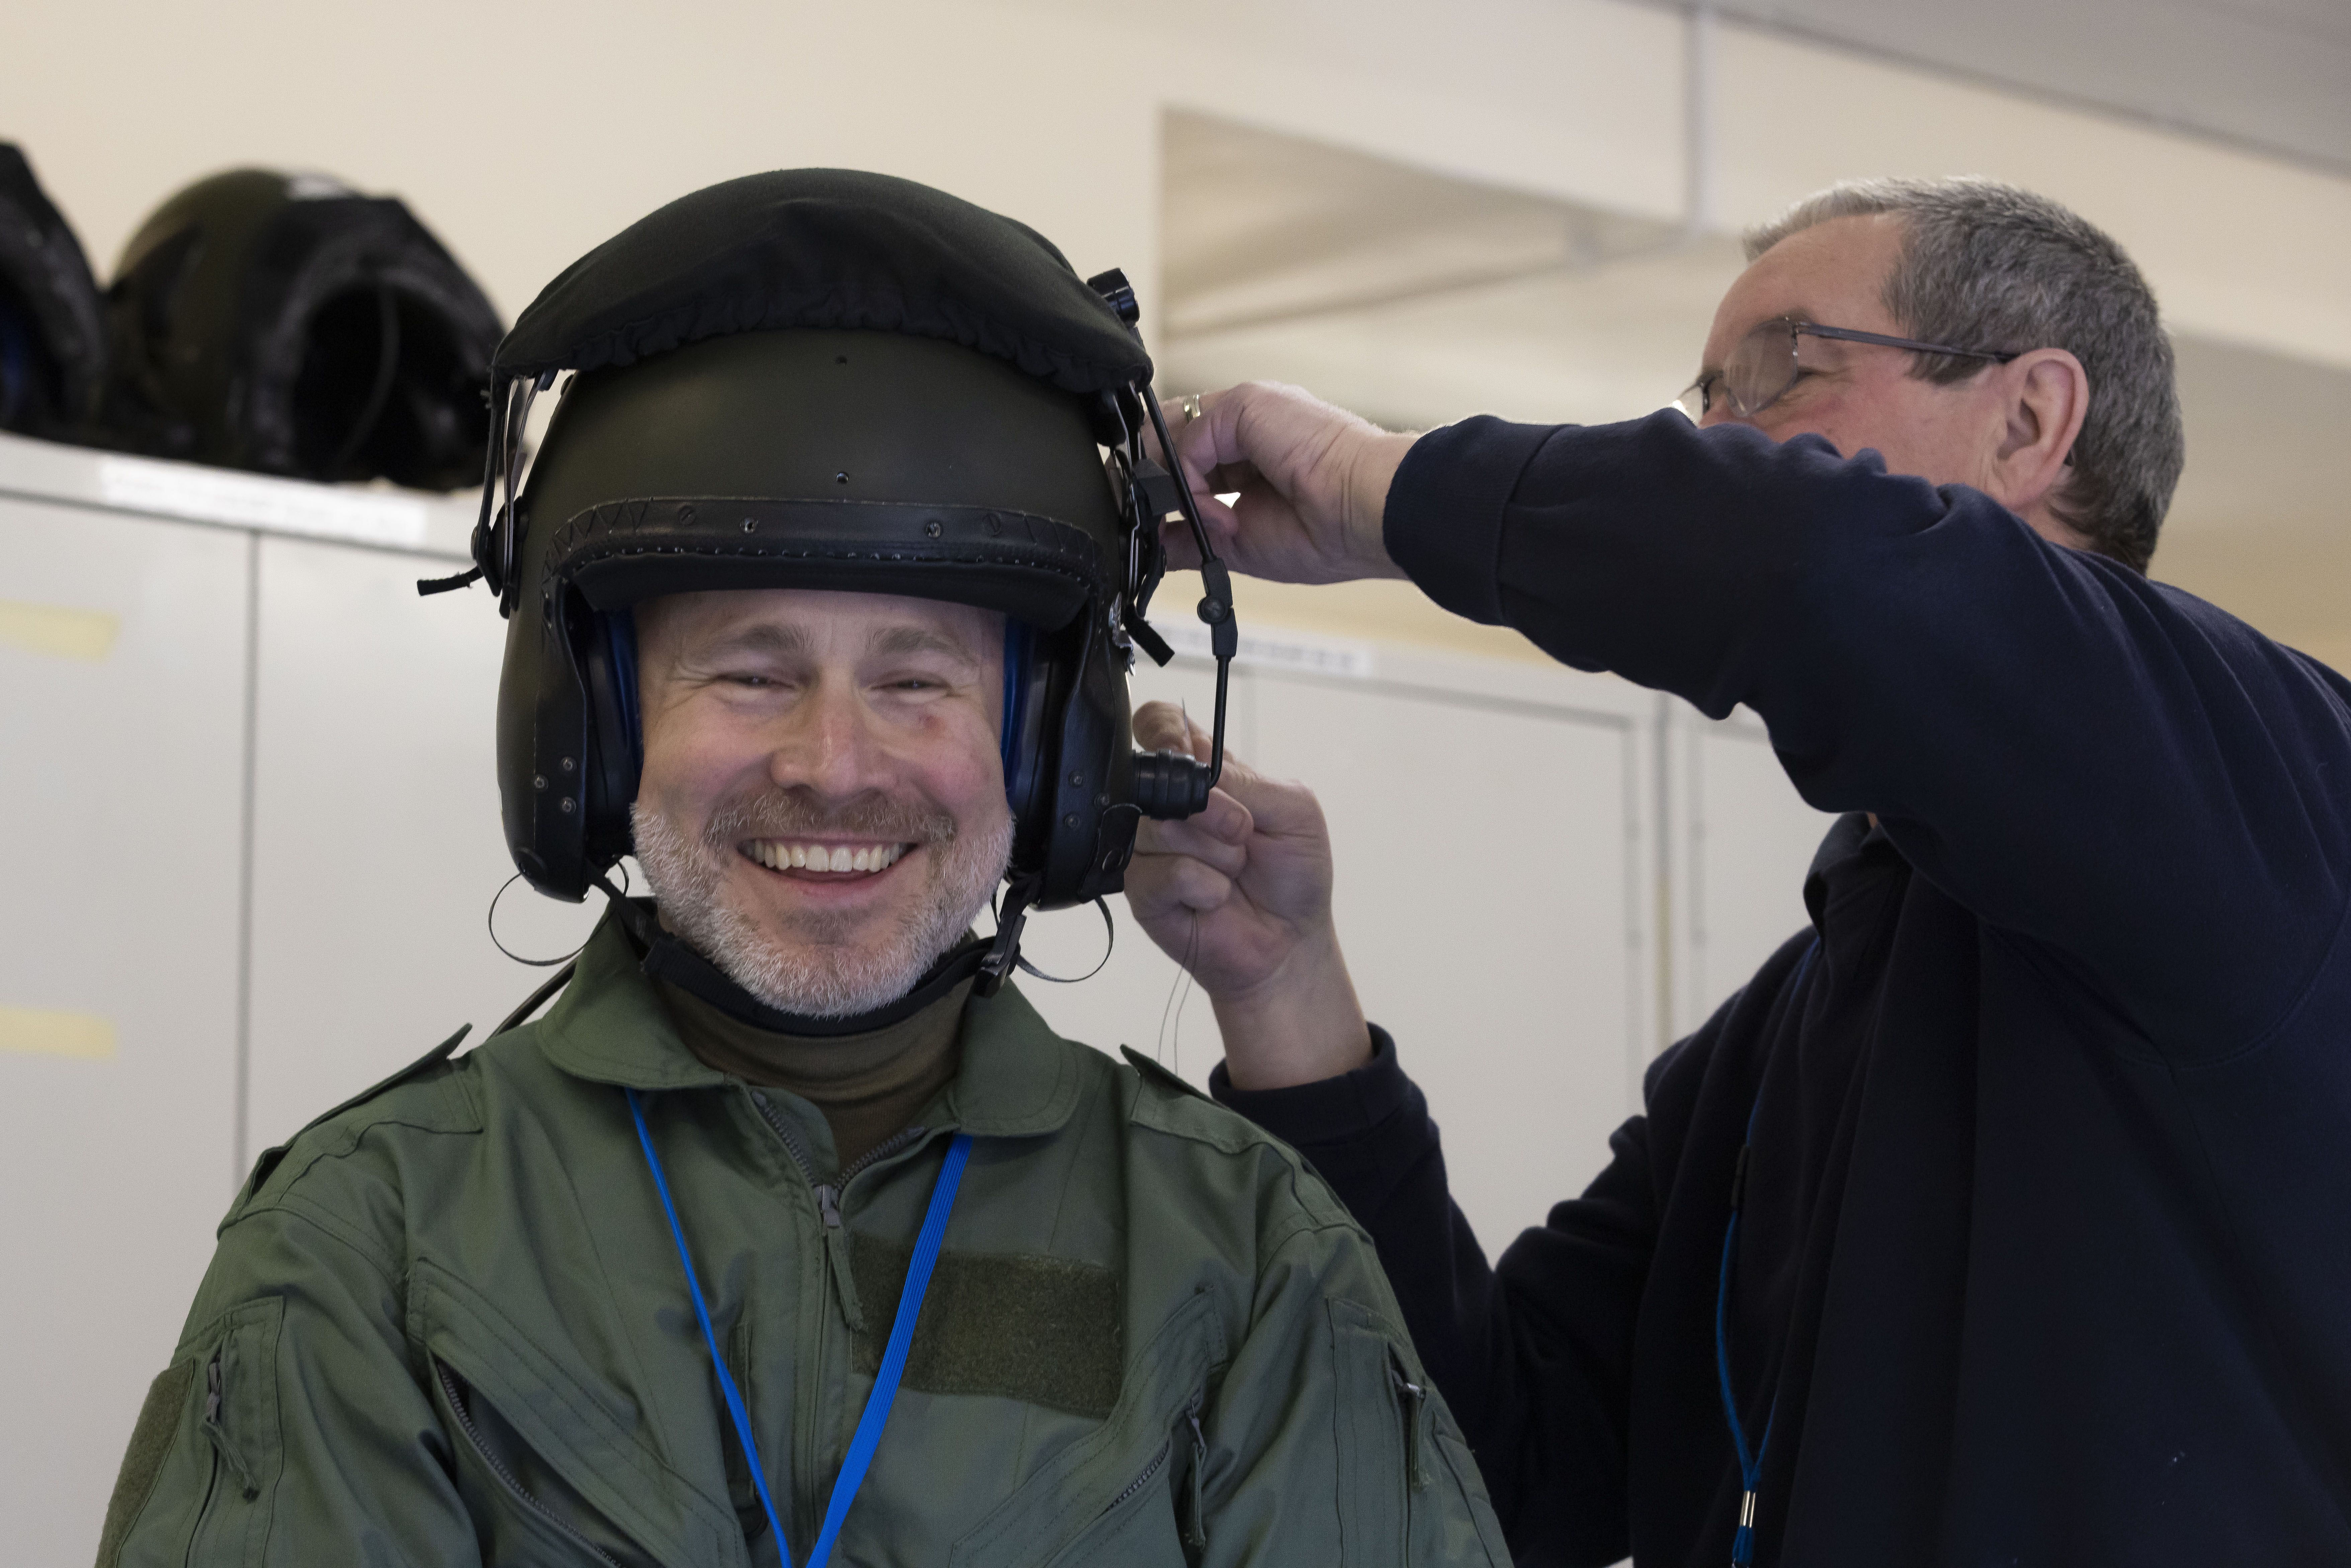 Father Aaron Beasley prepares for his flight in a Tutor aircraft at RAF Wittering